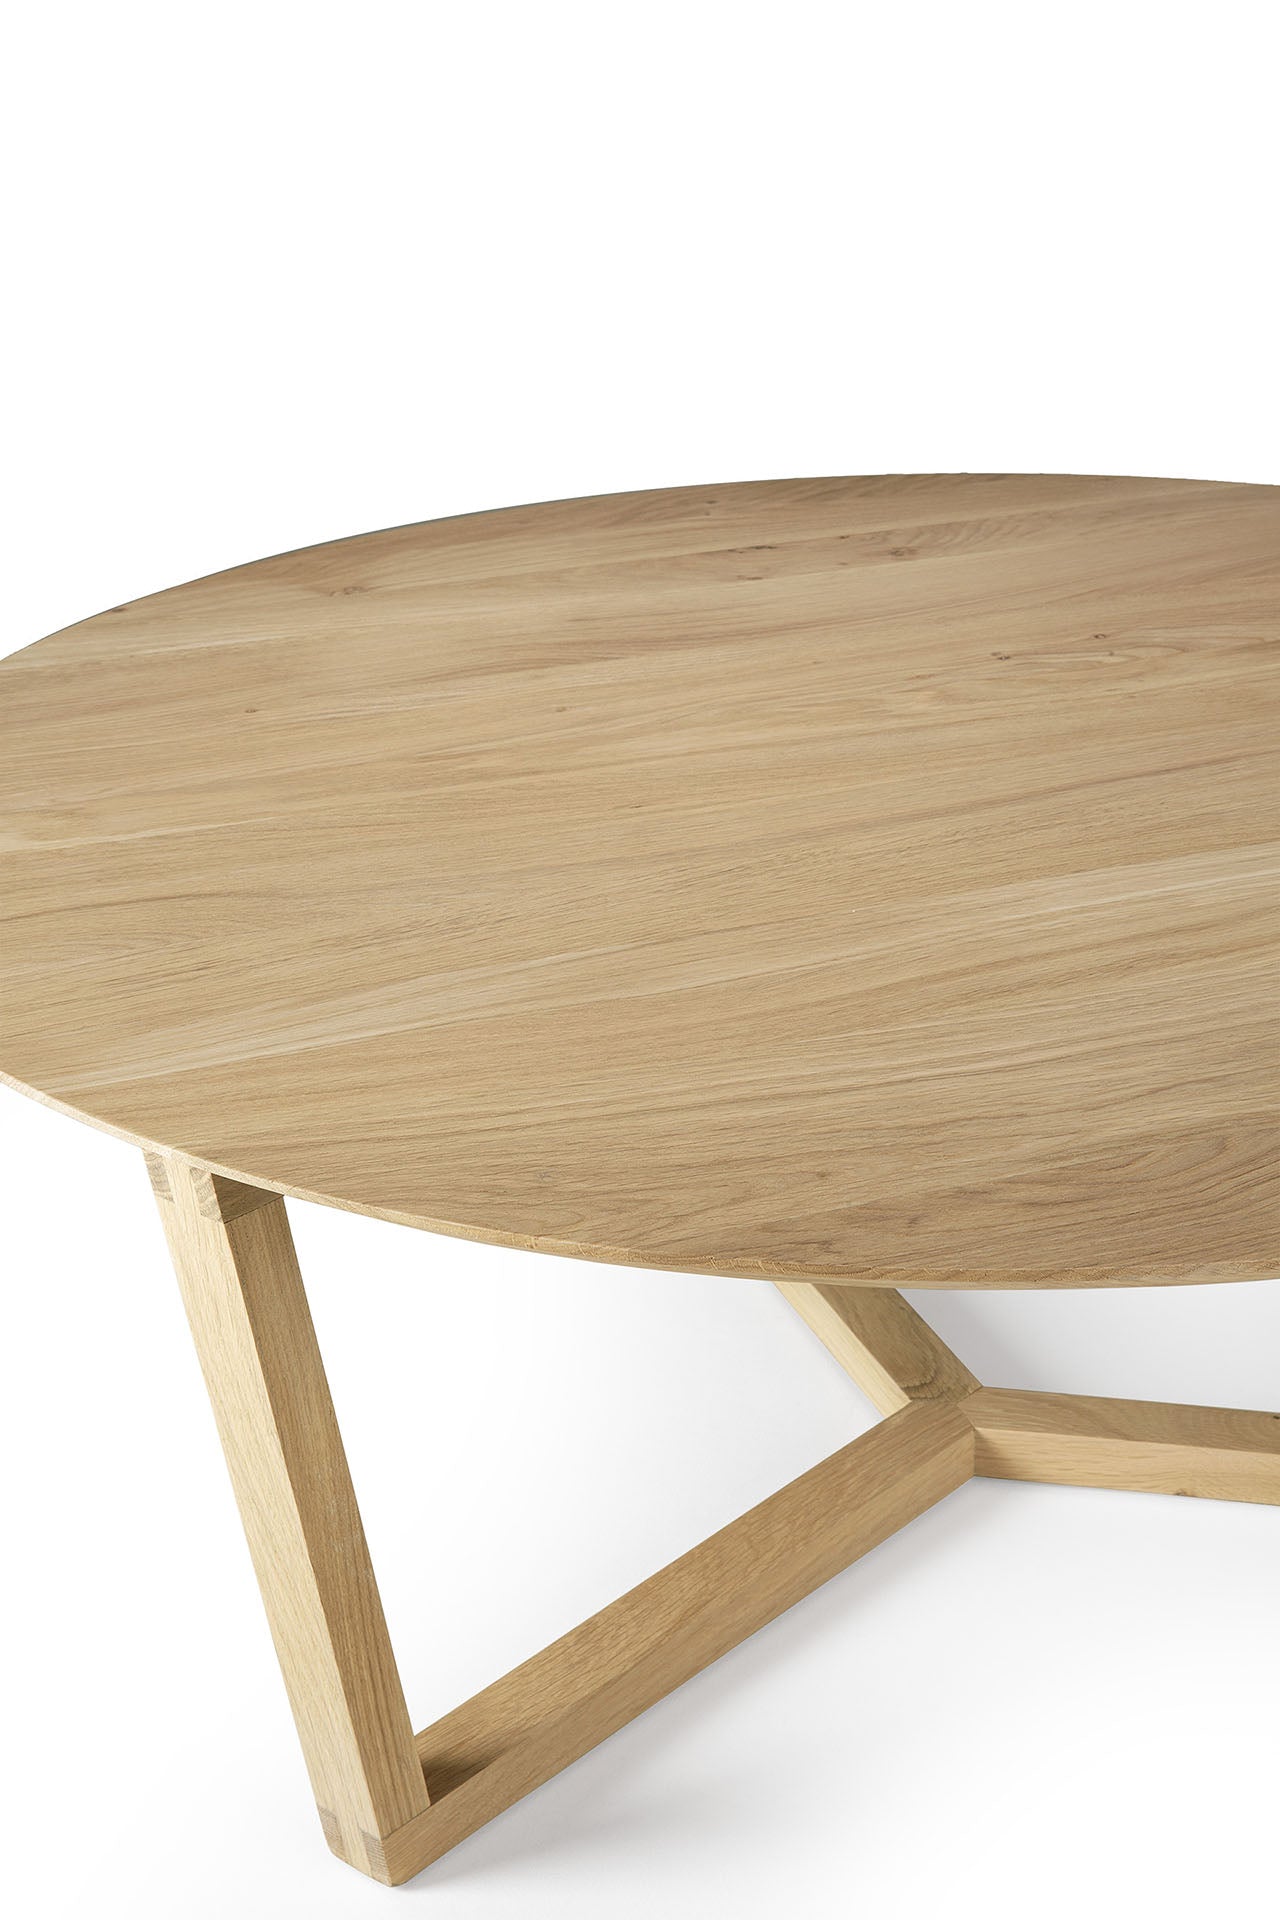 Ethnicraft Oak Tripod Coffee Table available from Make Your House A Home, Bendigo, Victoria, Australia